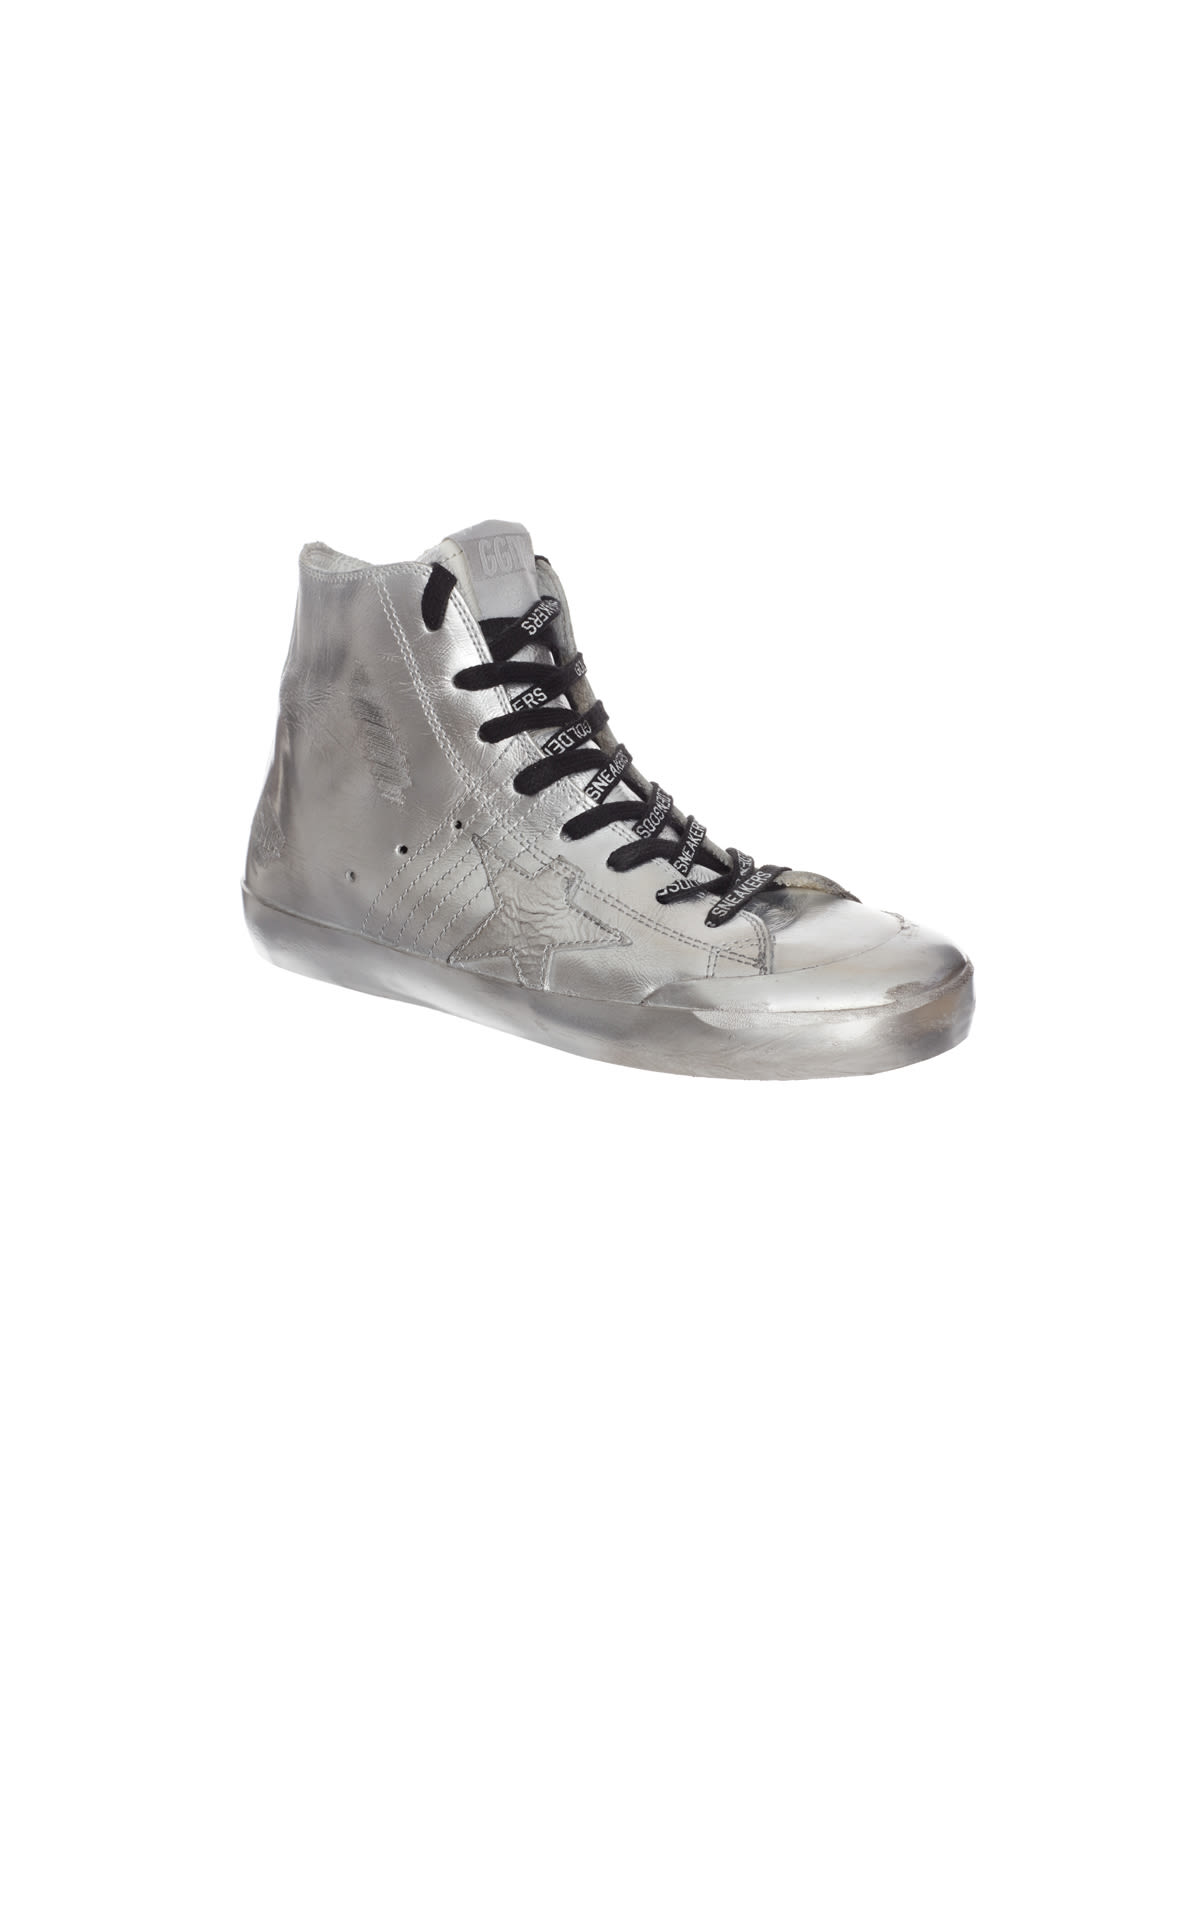 Golden Goose Women's francy silver limited edition trainer from Bicester Village